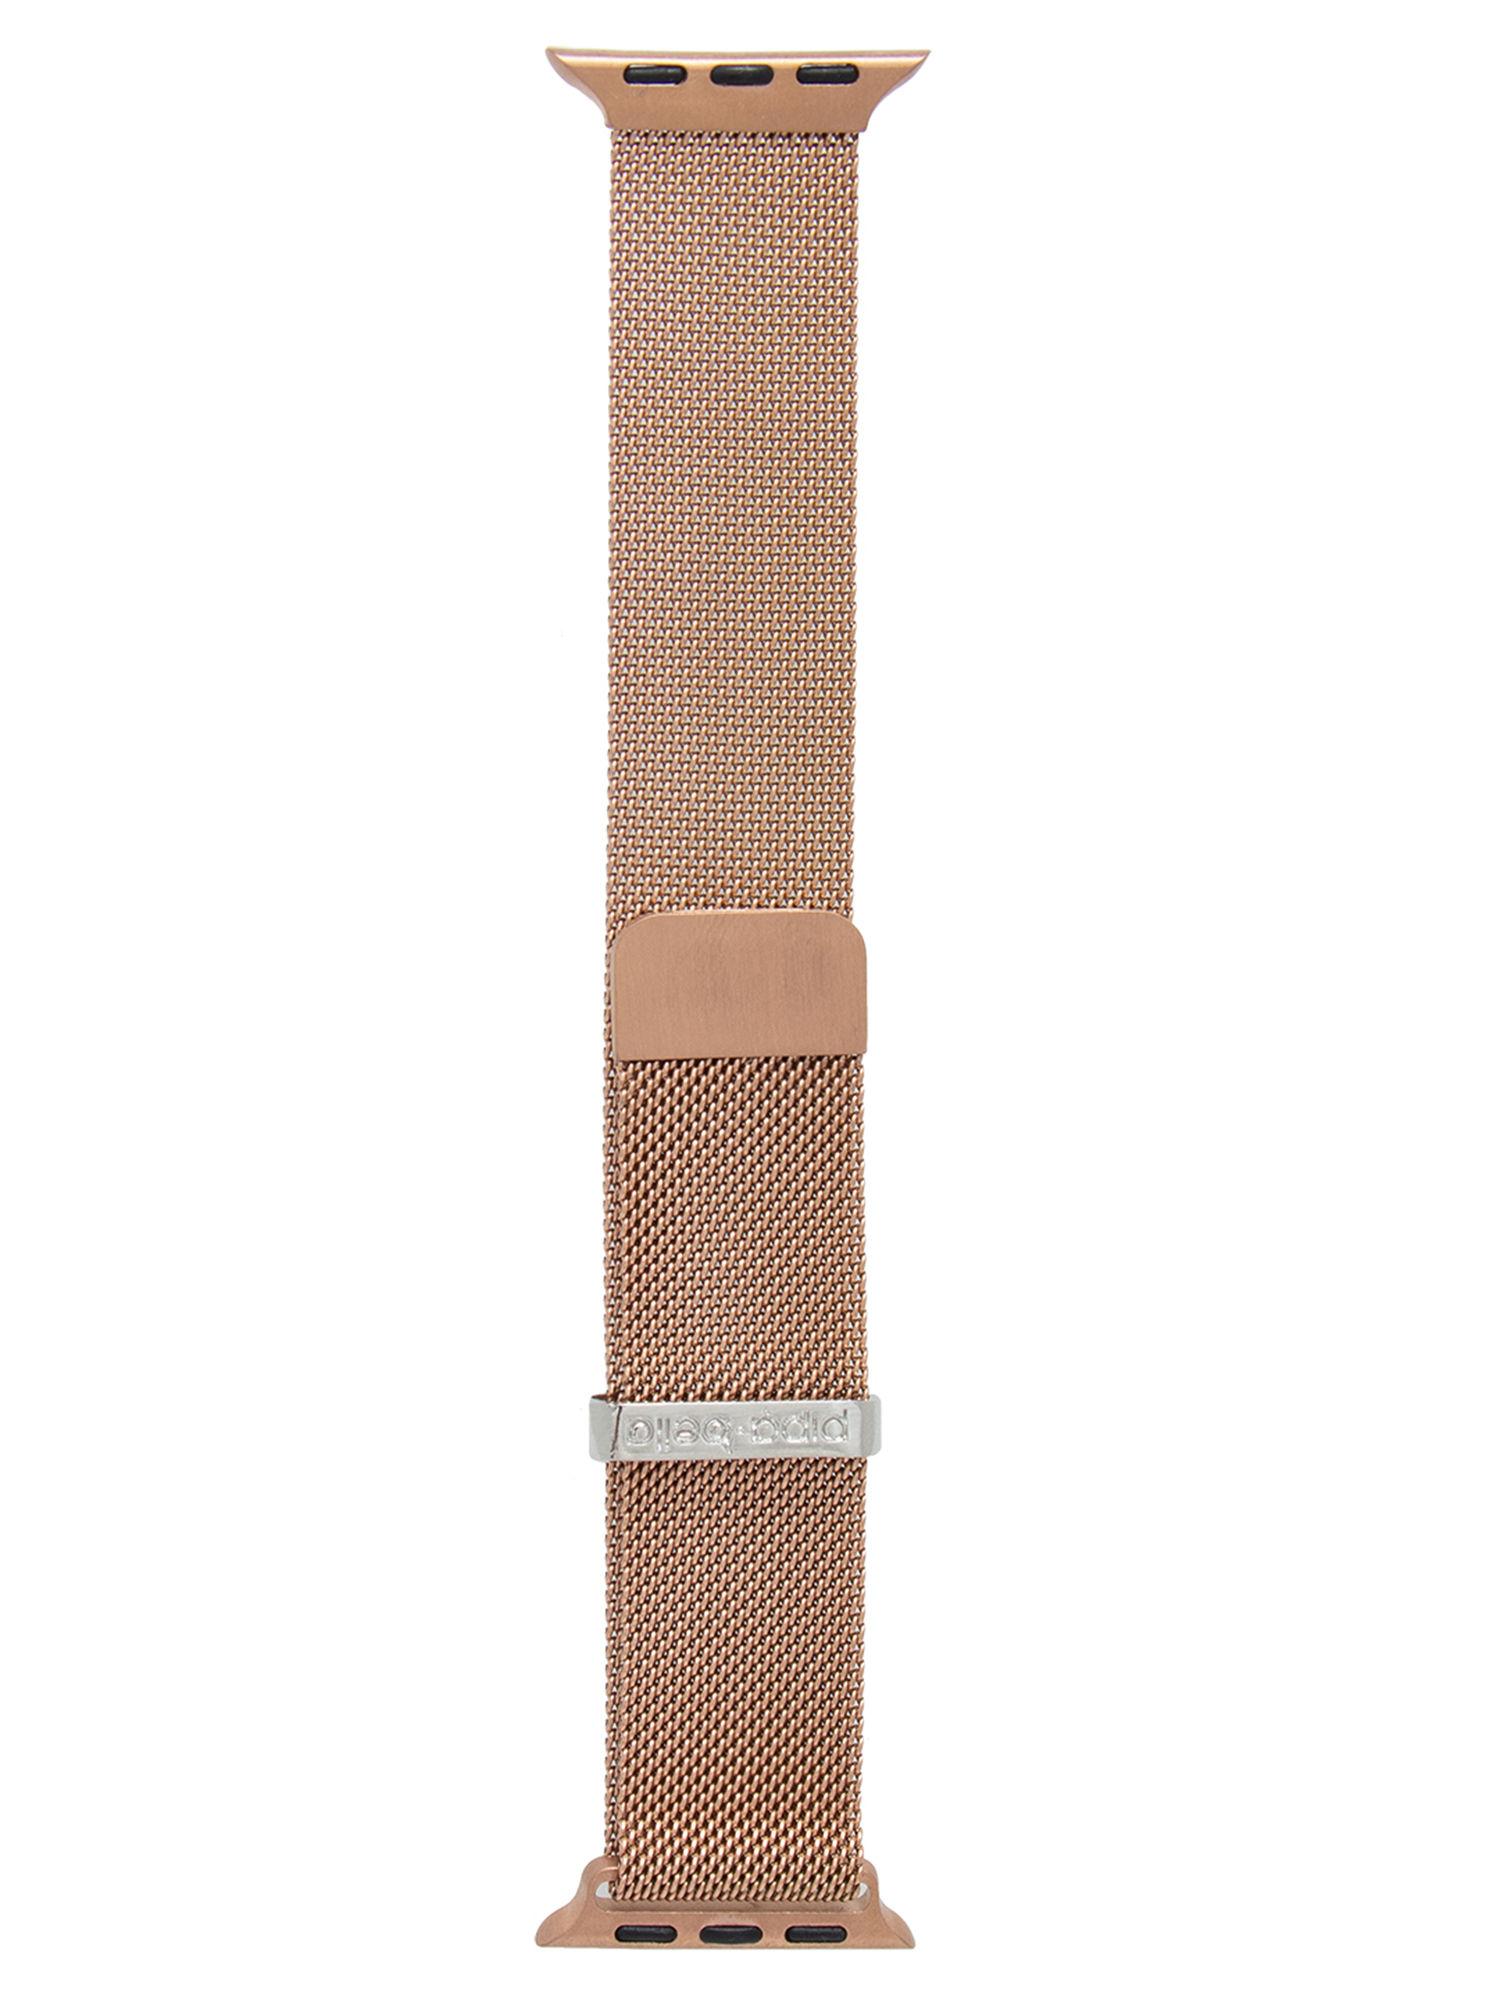 chic solid rose gold apple watch strap